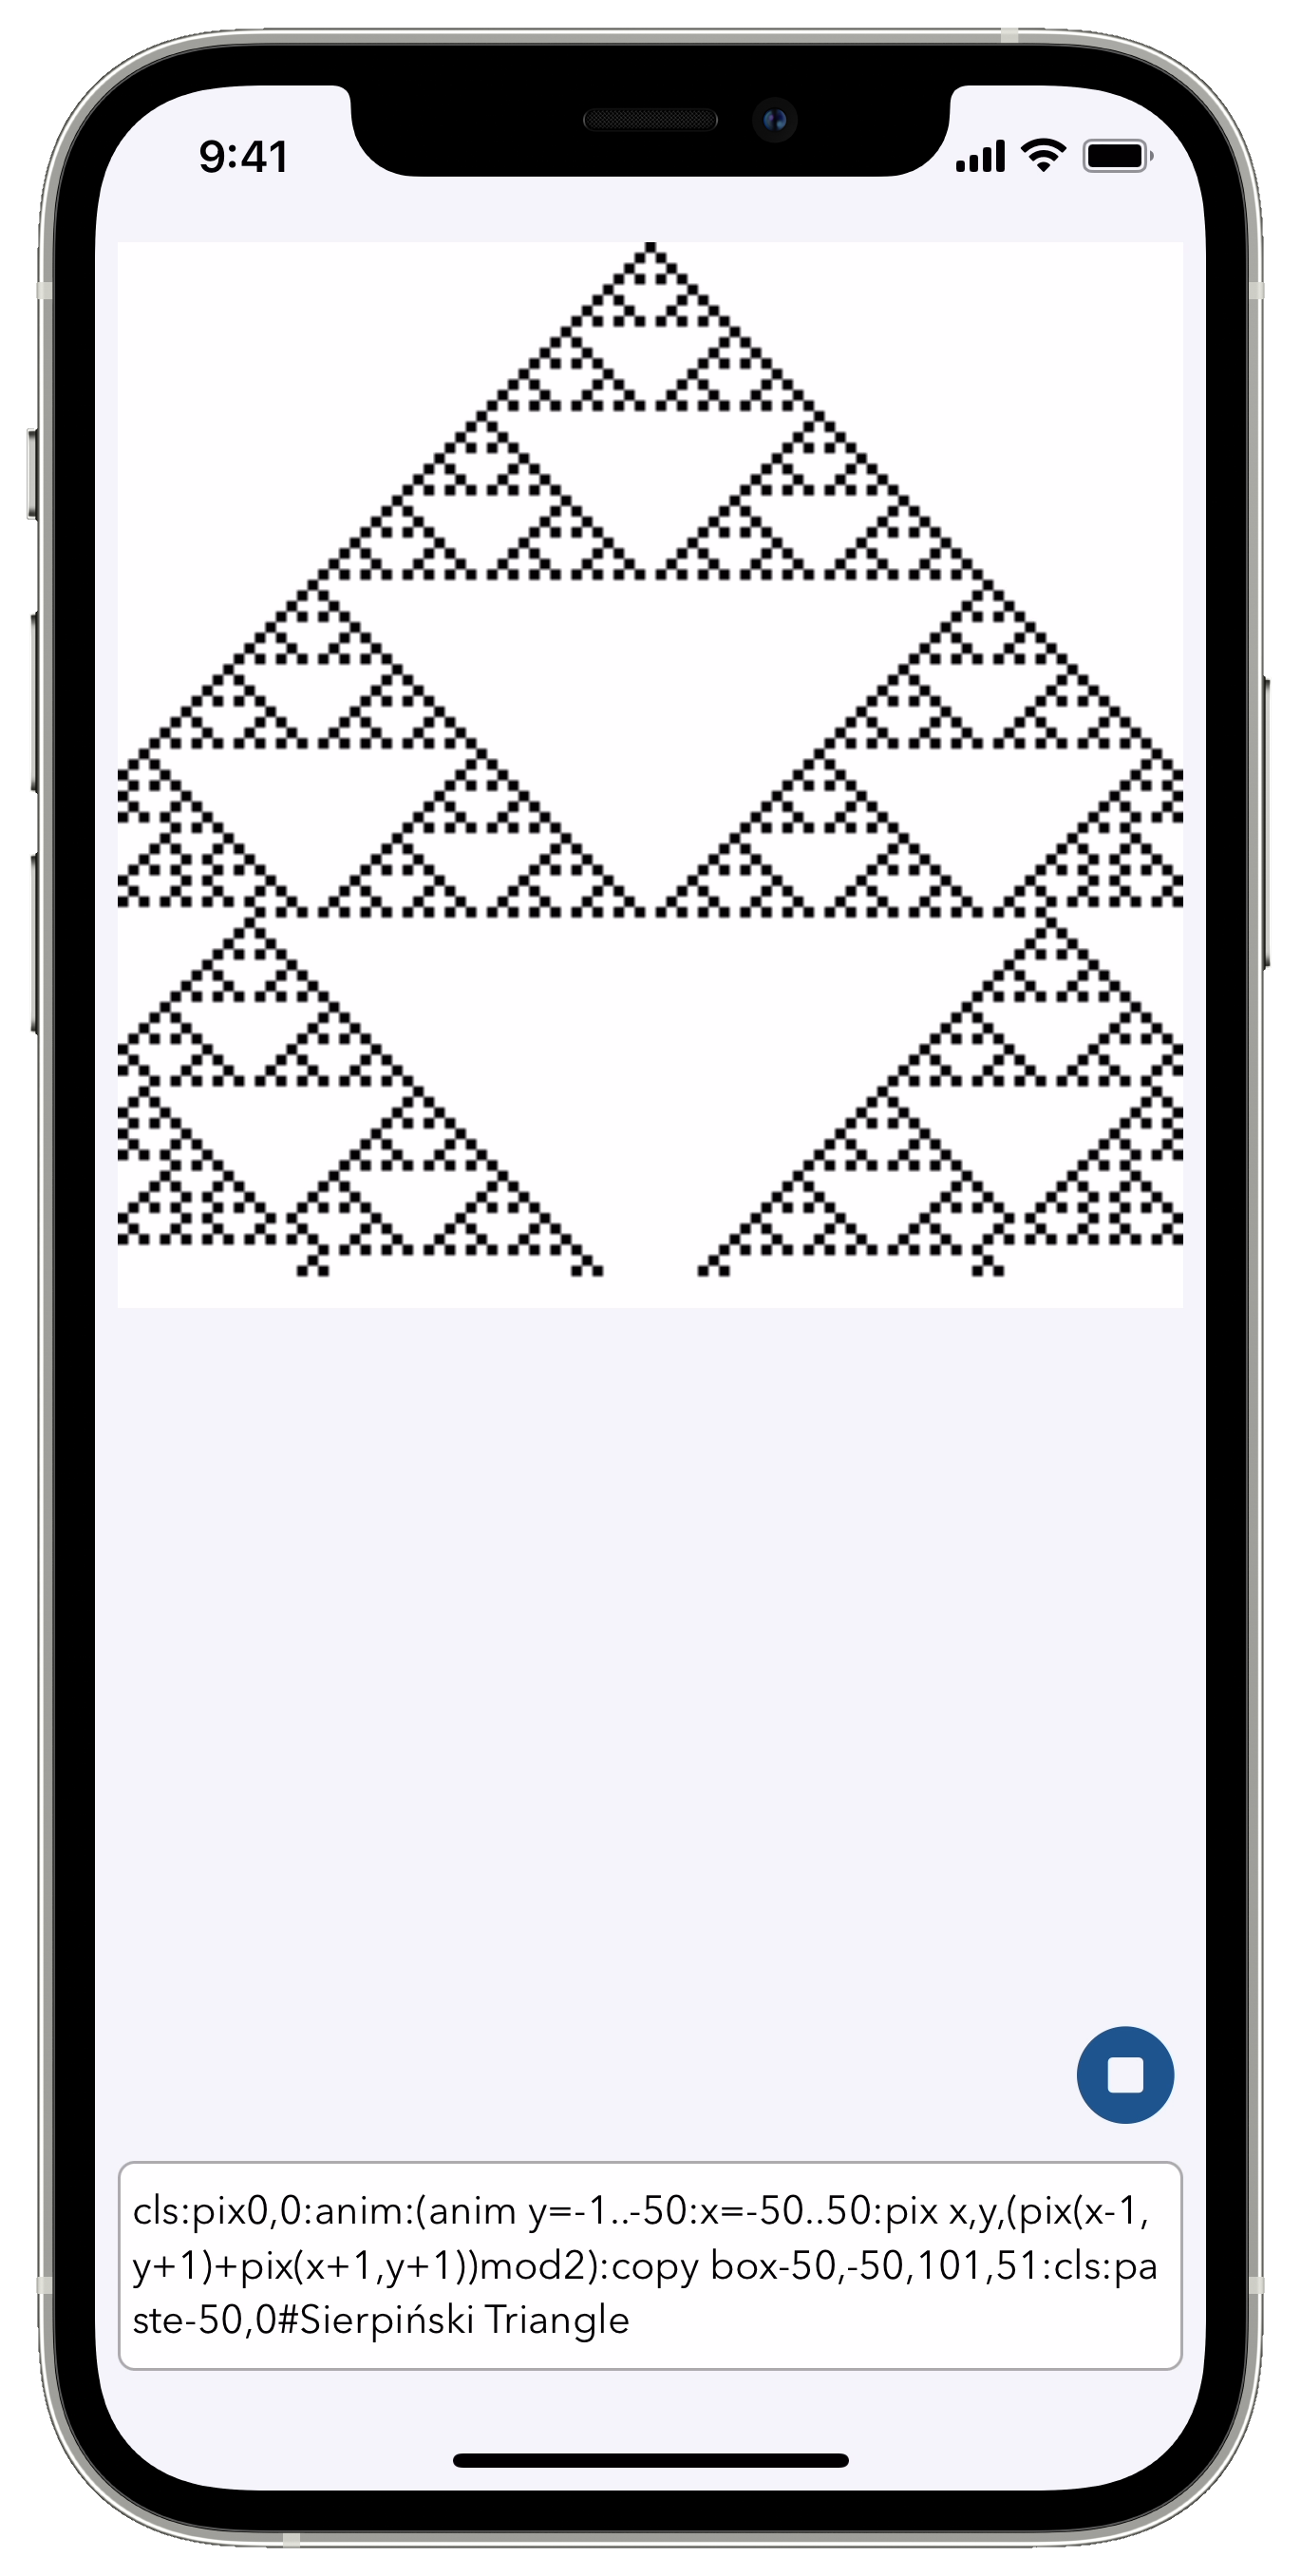 PixelNote, running a demo program which produces a Sierpiński triangle fractal pattern one row at a time from the top down; the pixel display contains a recursive pattern of triangles drawn as black pixels on a white background, and the text field at the bottom contains the code which produces this animation.